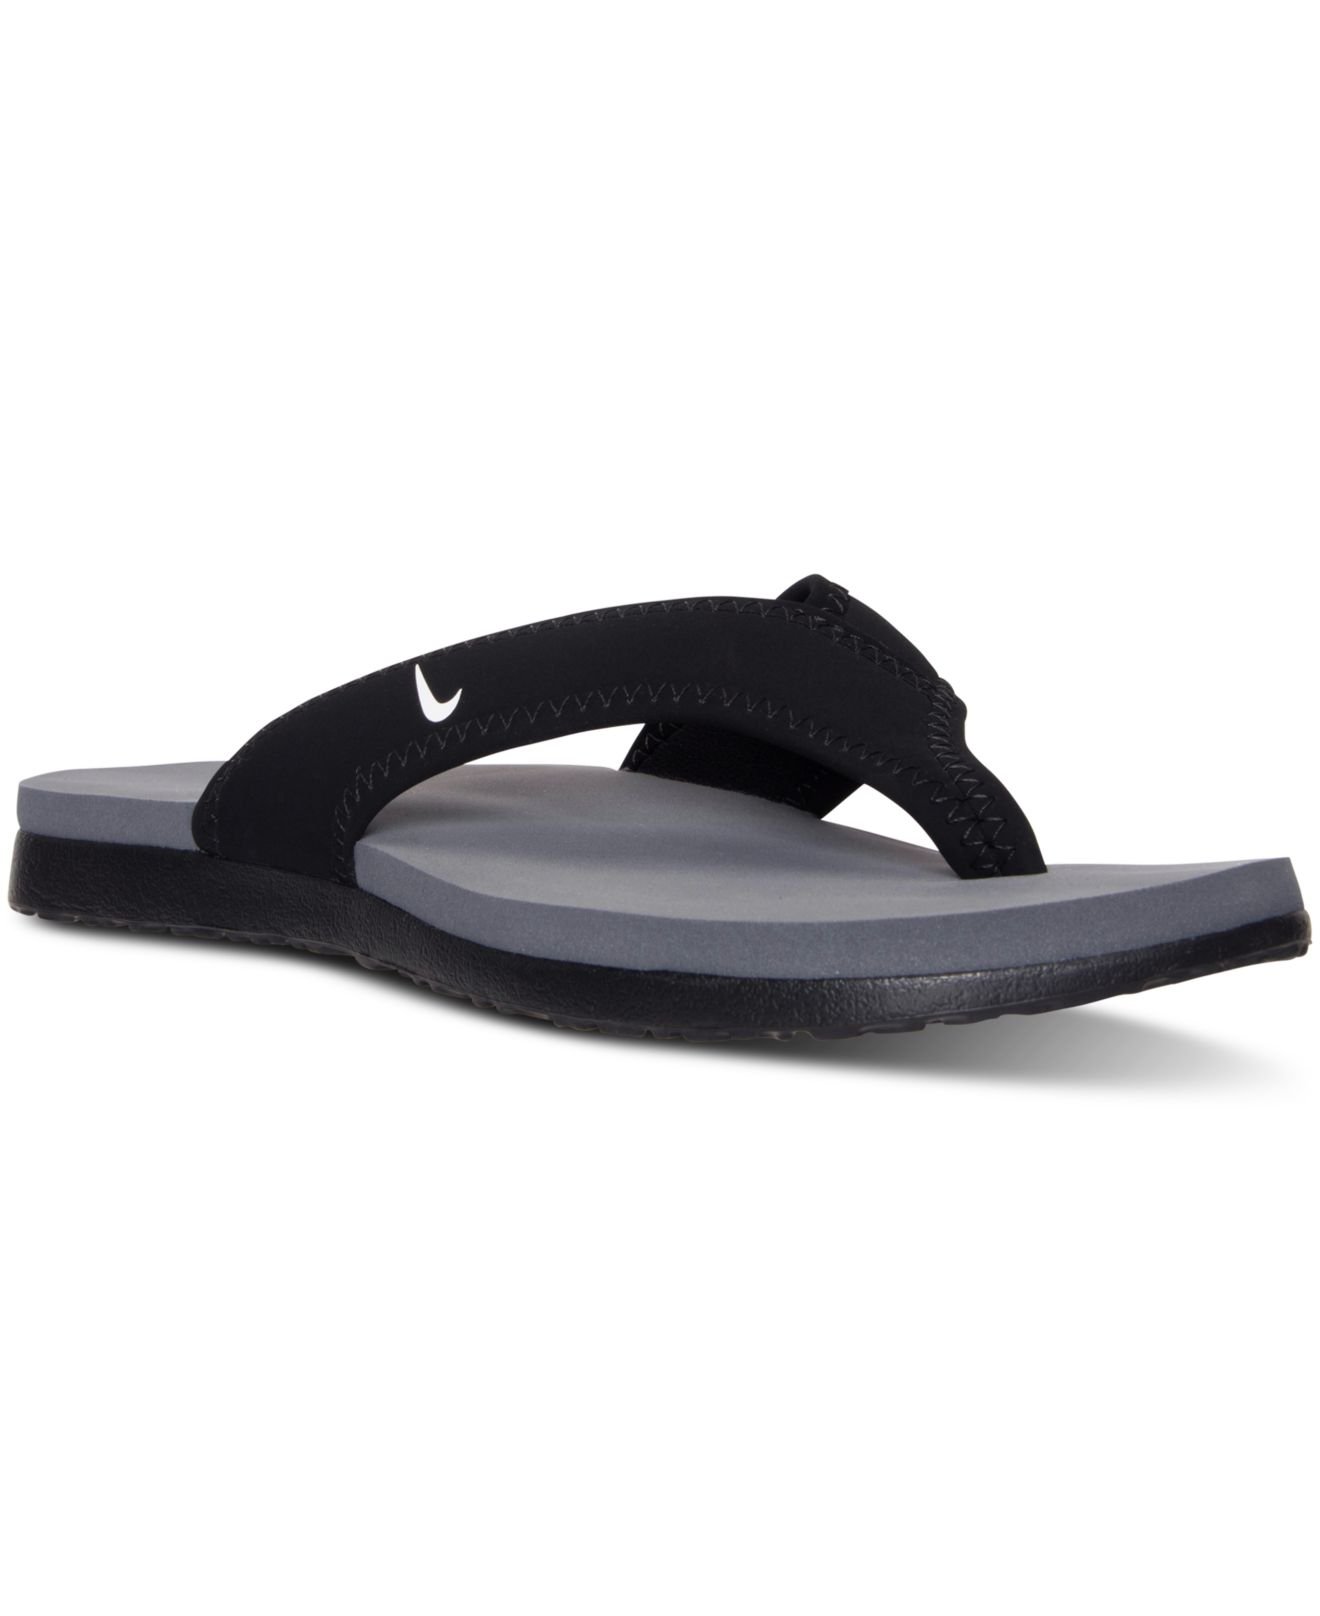 Celso Plus Thong Sandals 